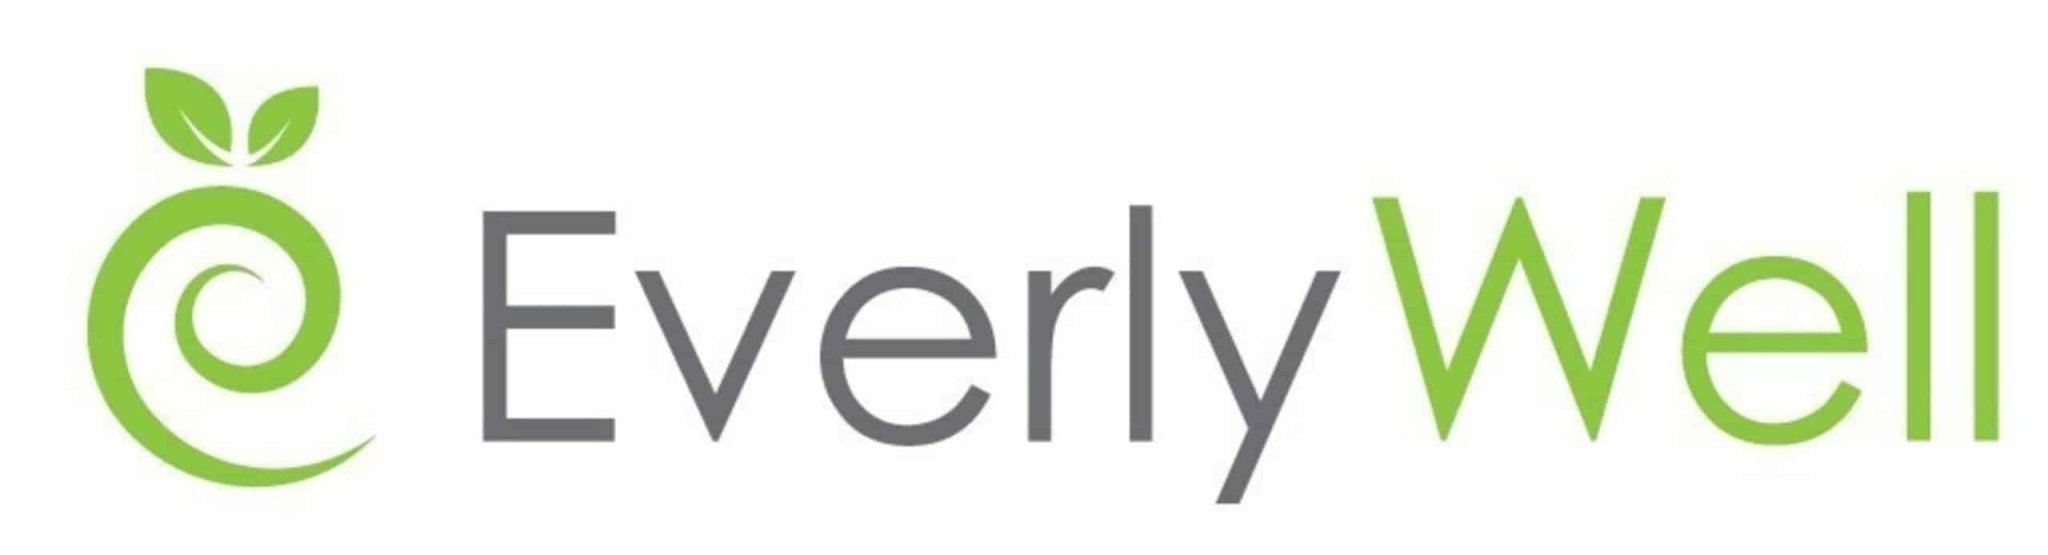 Looking For An Affordable EverlyWell Alternative? - Lab Me